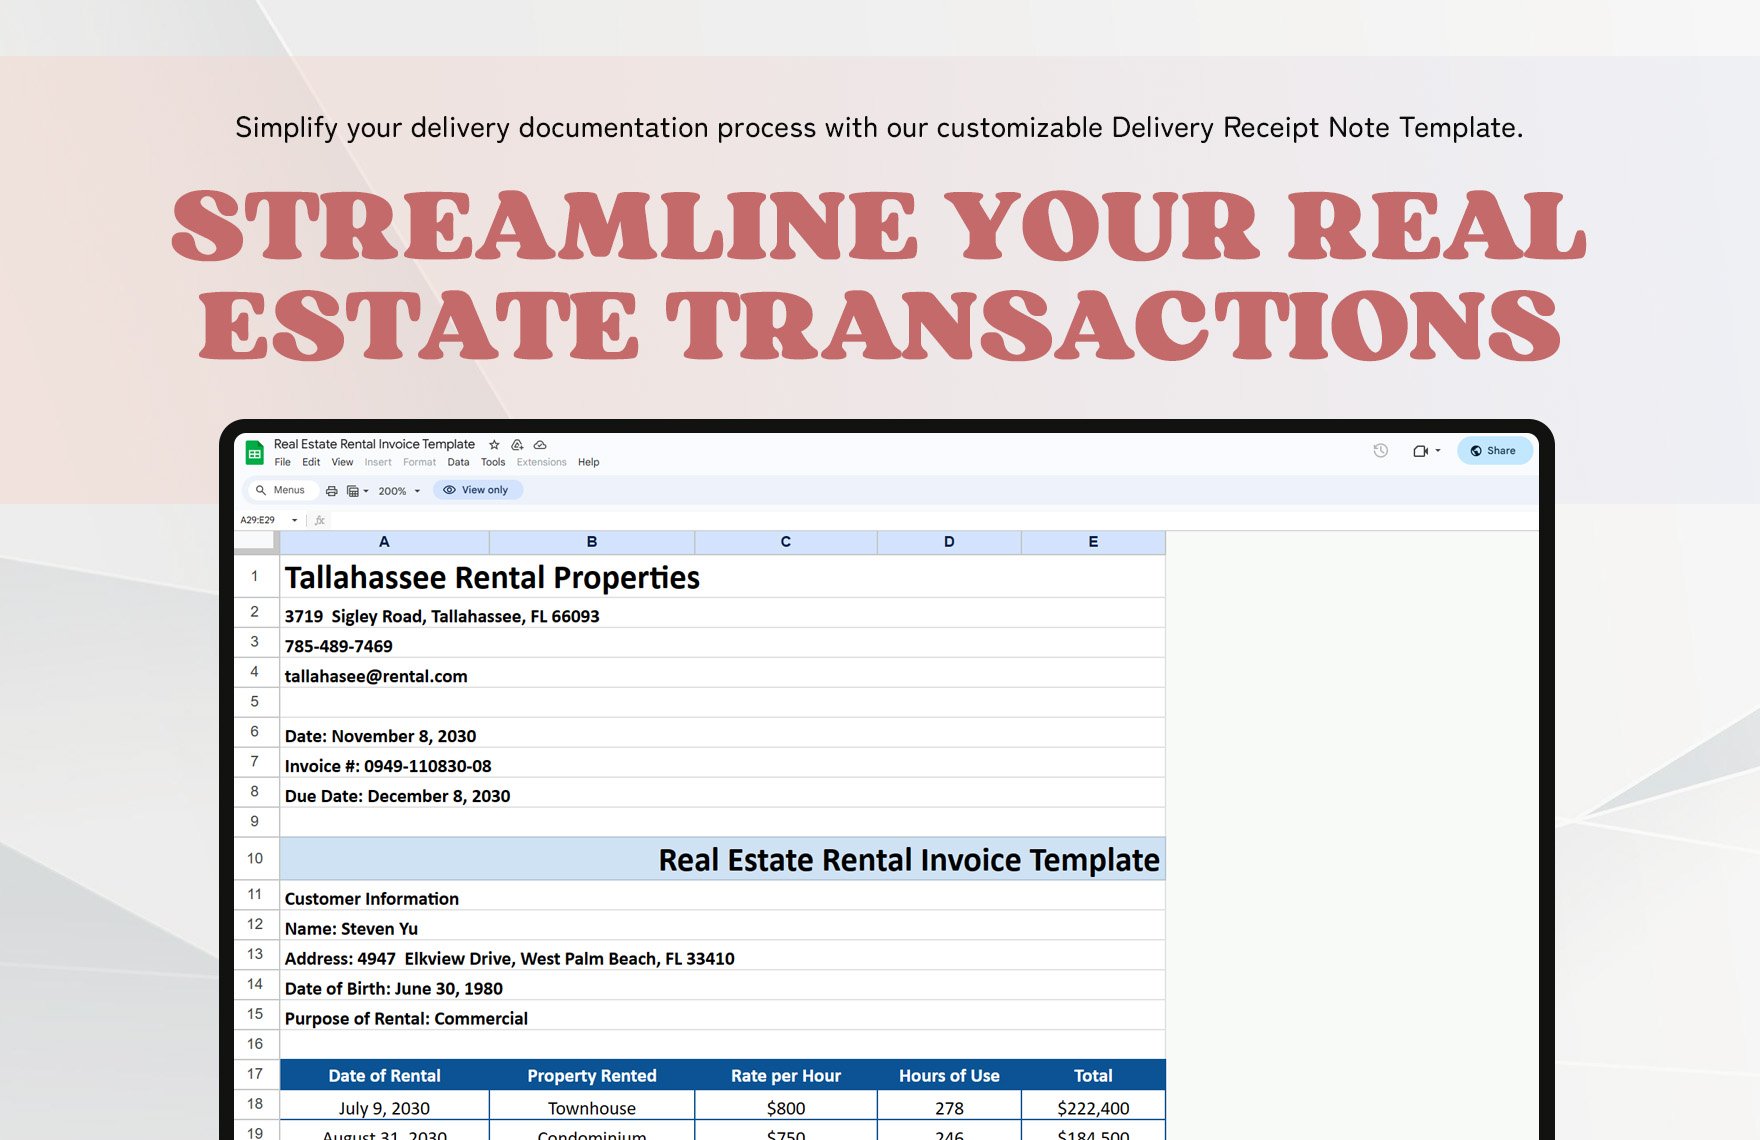 Real Estate Rental Invoice Template